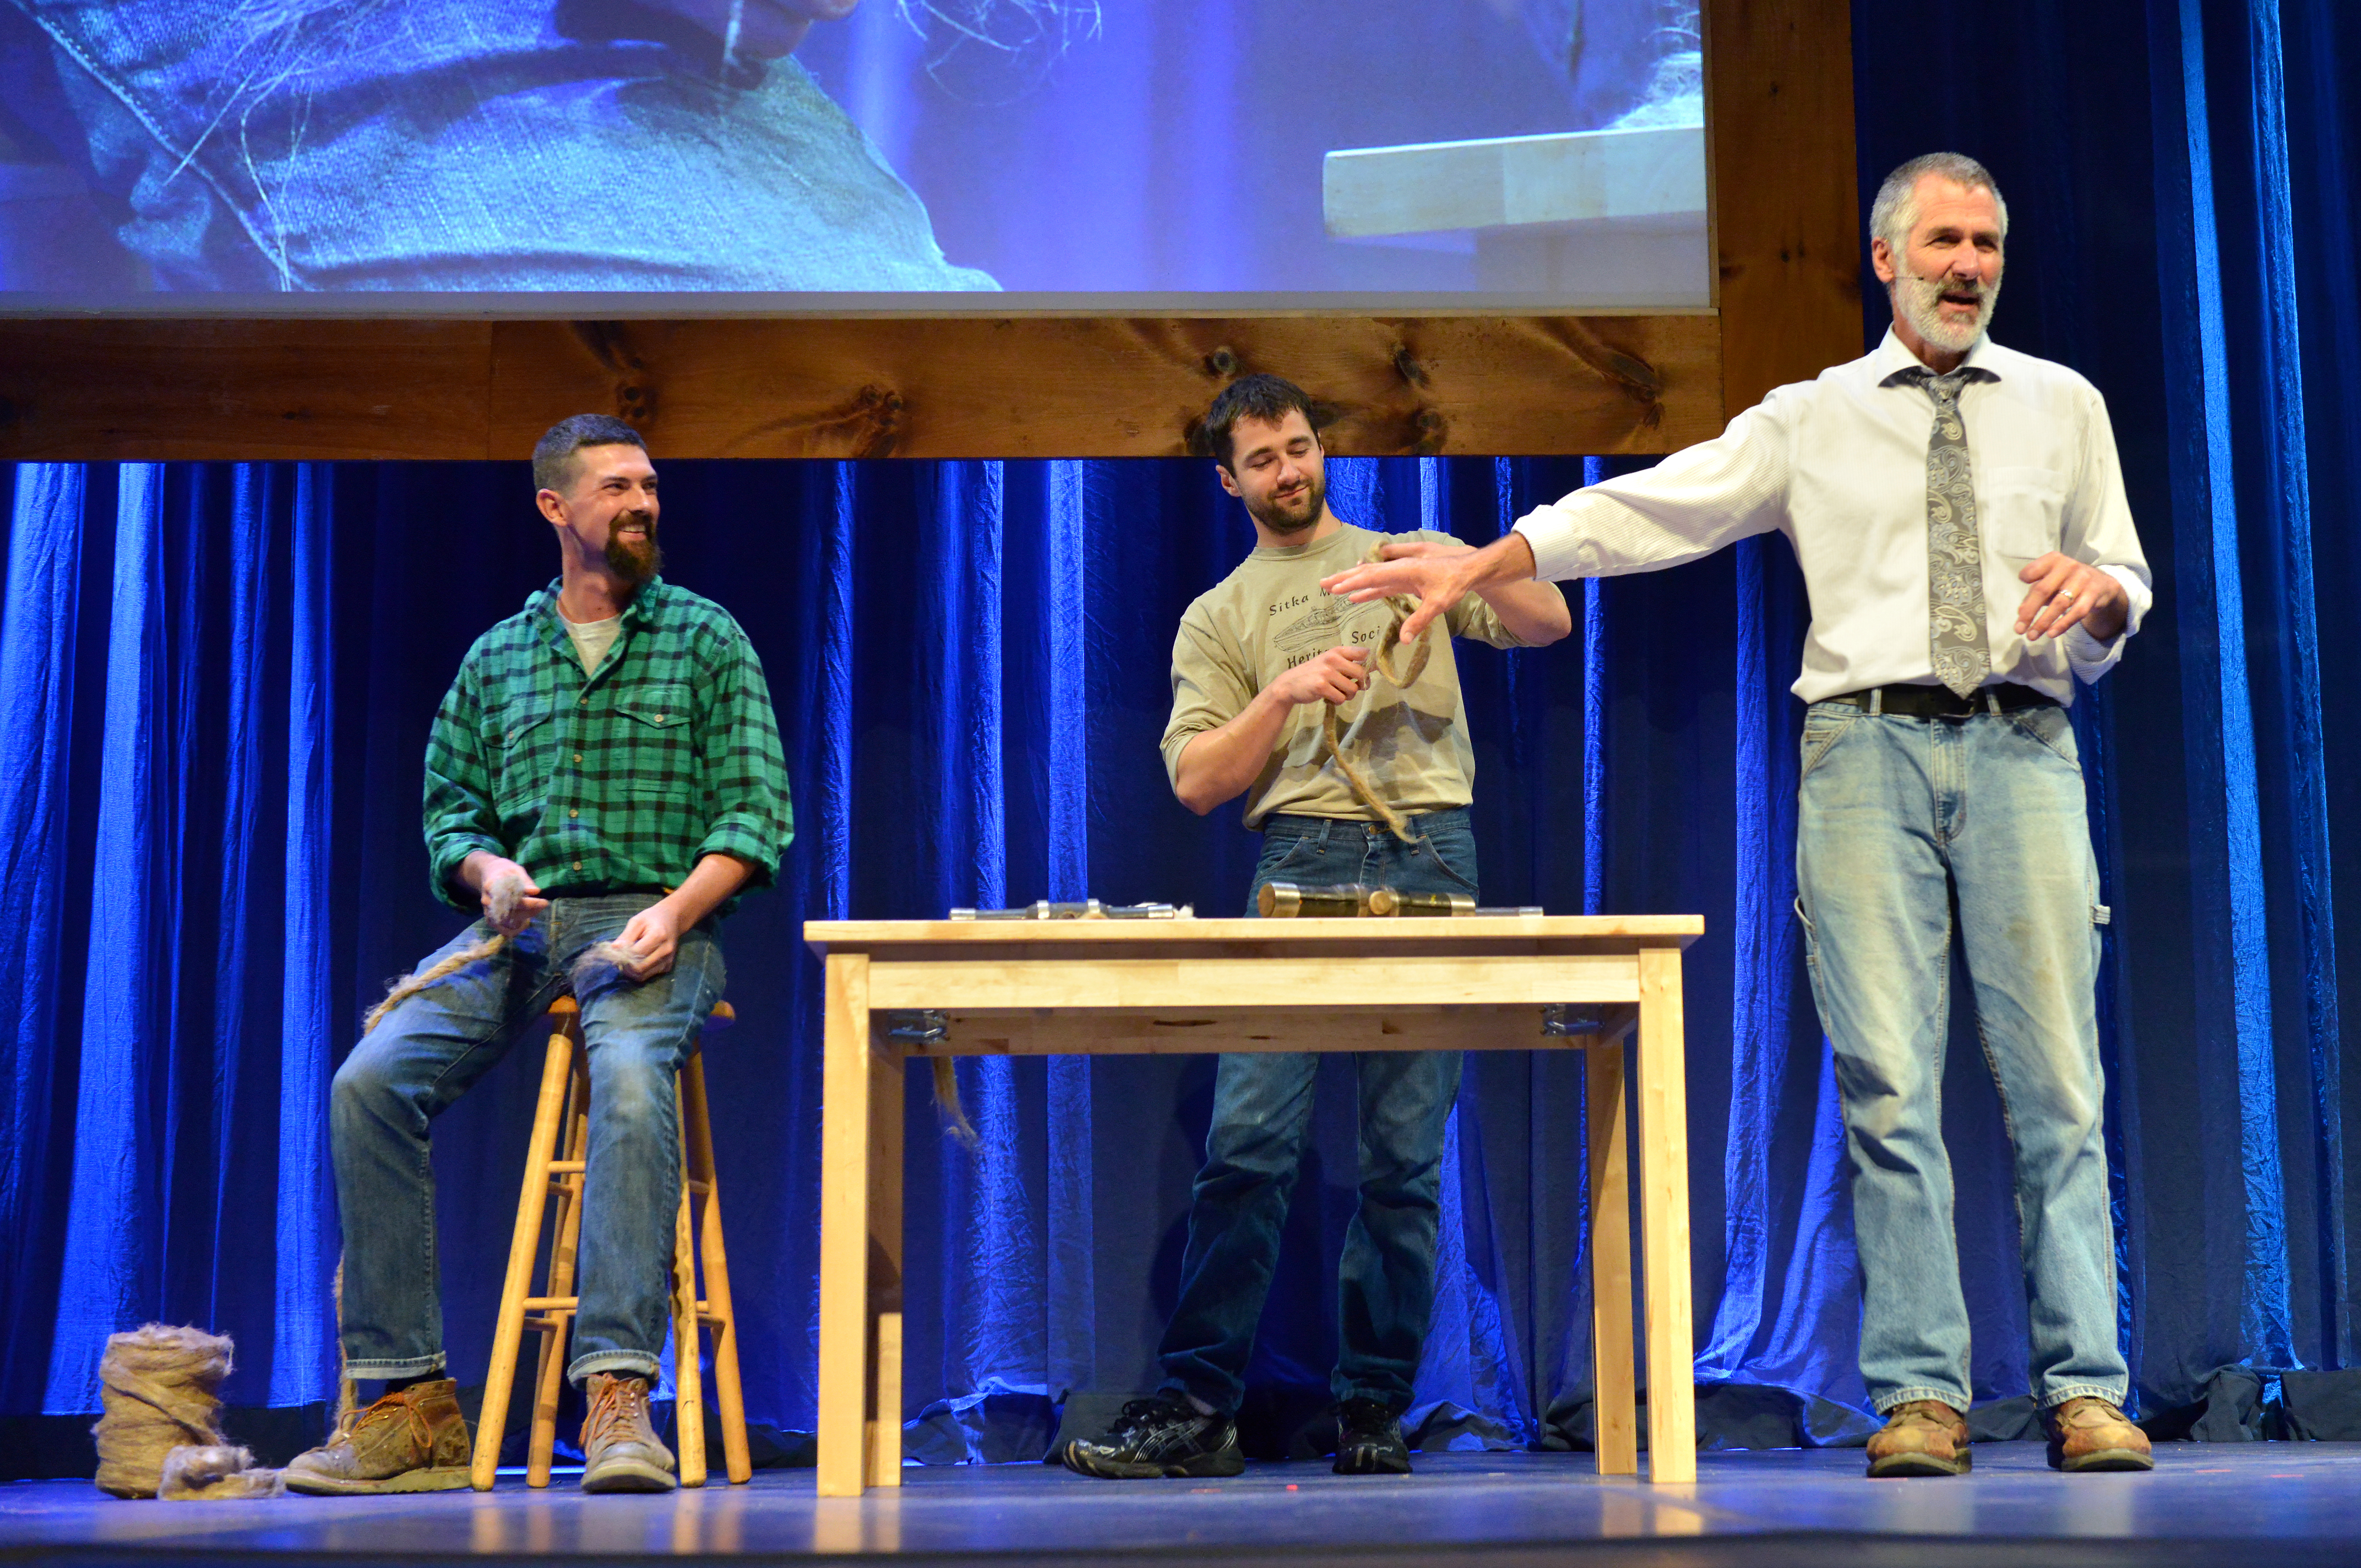 Two men on stage with shipbuilding materials in their hands while the fellow stands over them to explain what they are doing.